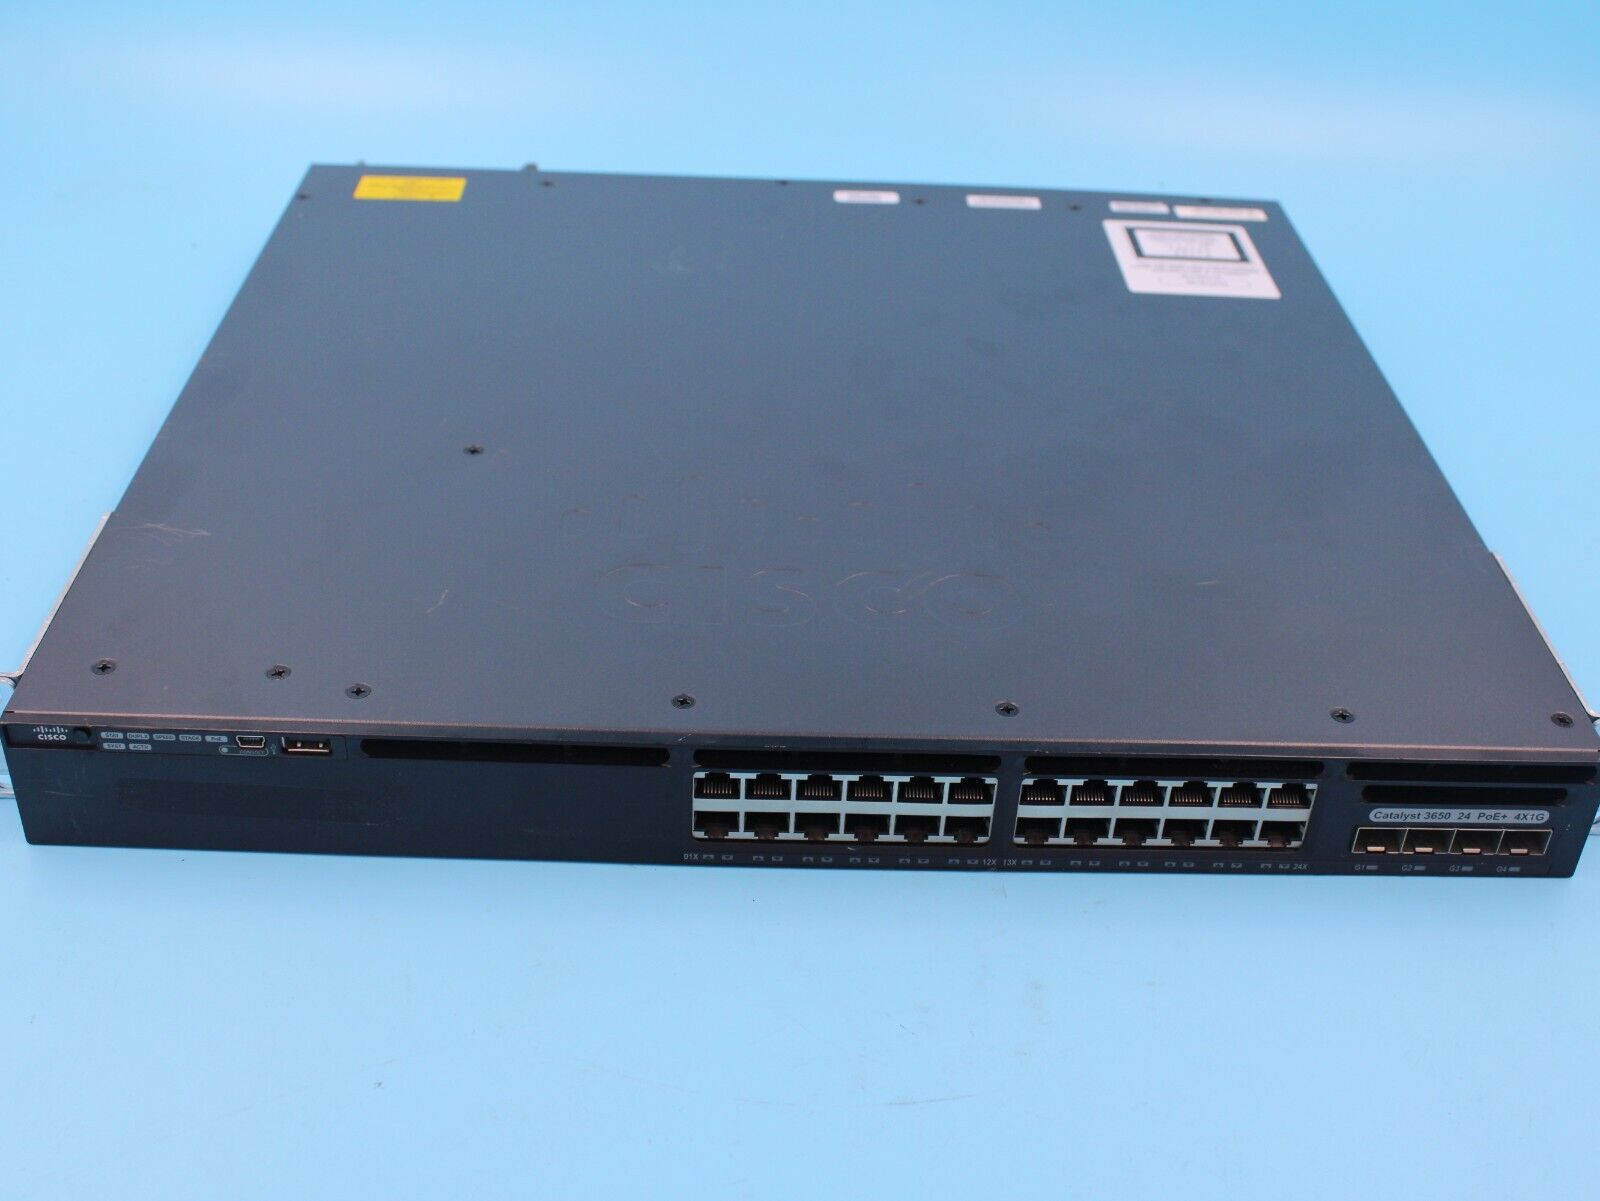 Cisco Catalyst WS-C3650-24PS-S 24-Port Gigabit Ethernet Switch TESTED